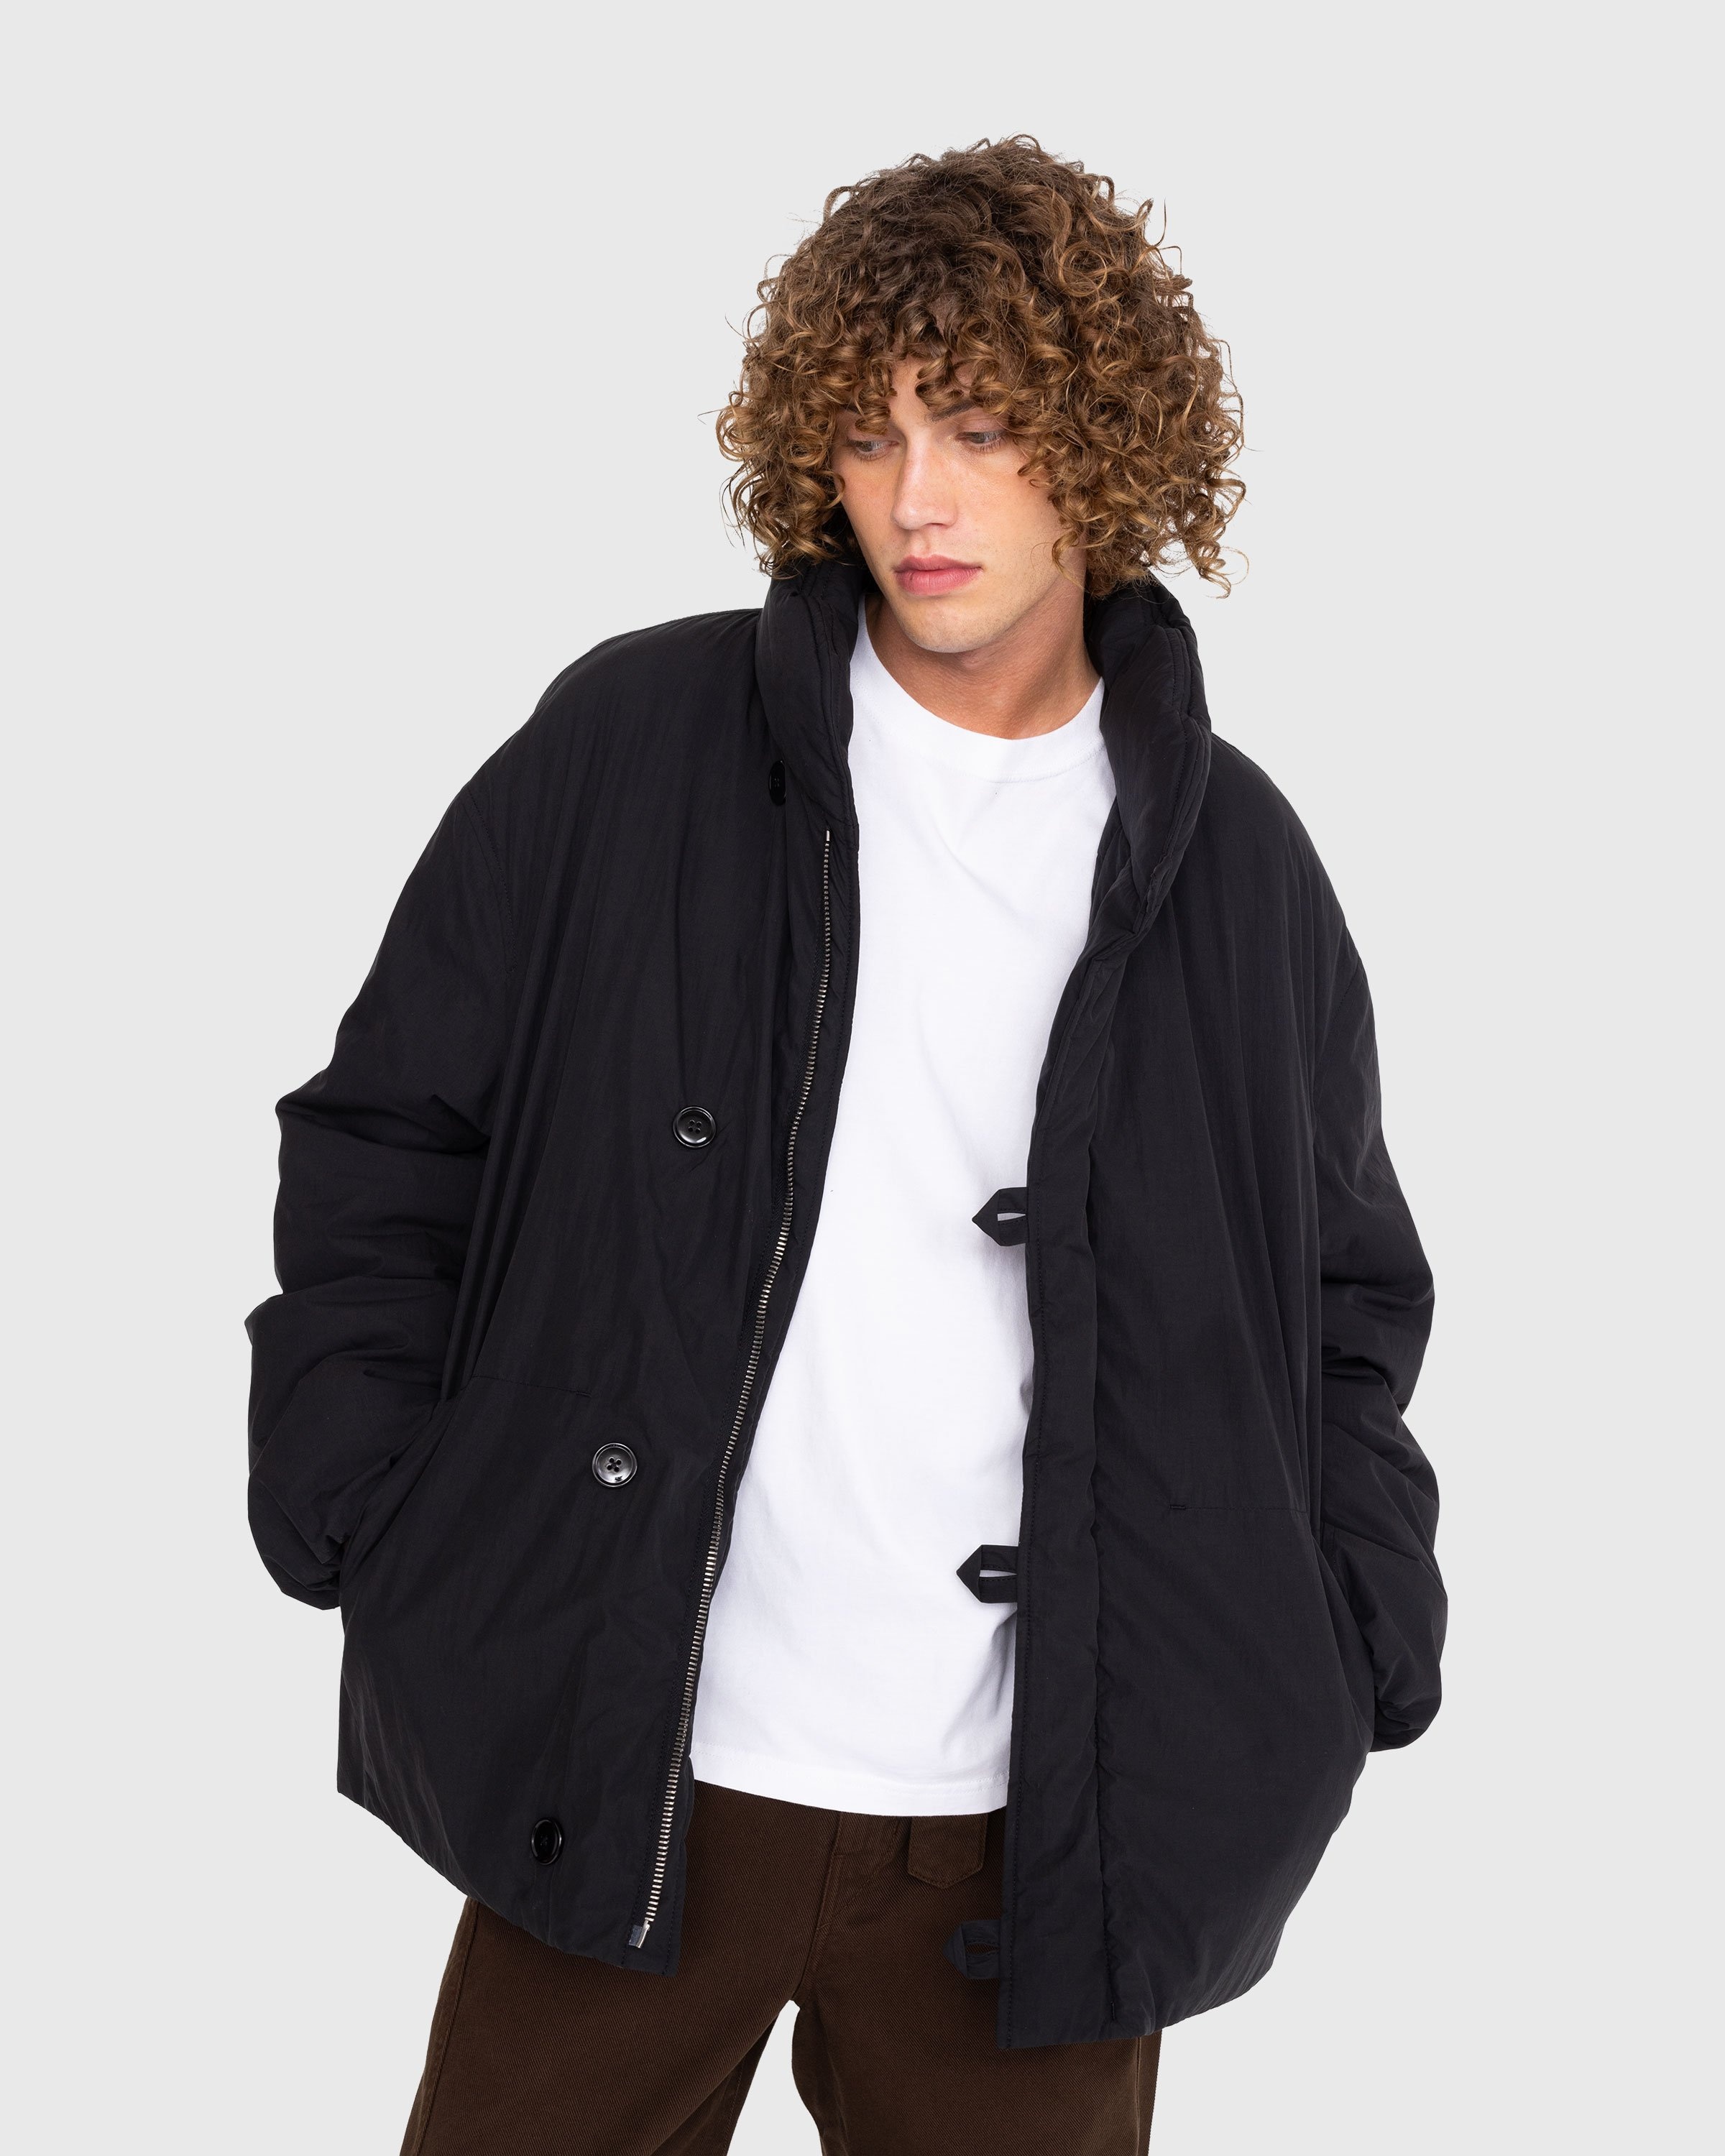 22AW Lemaire Puffer Jacket 46 - ジャケット/アウター